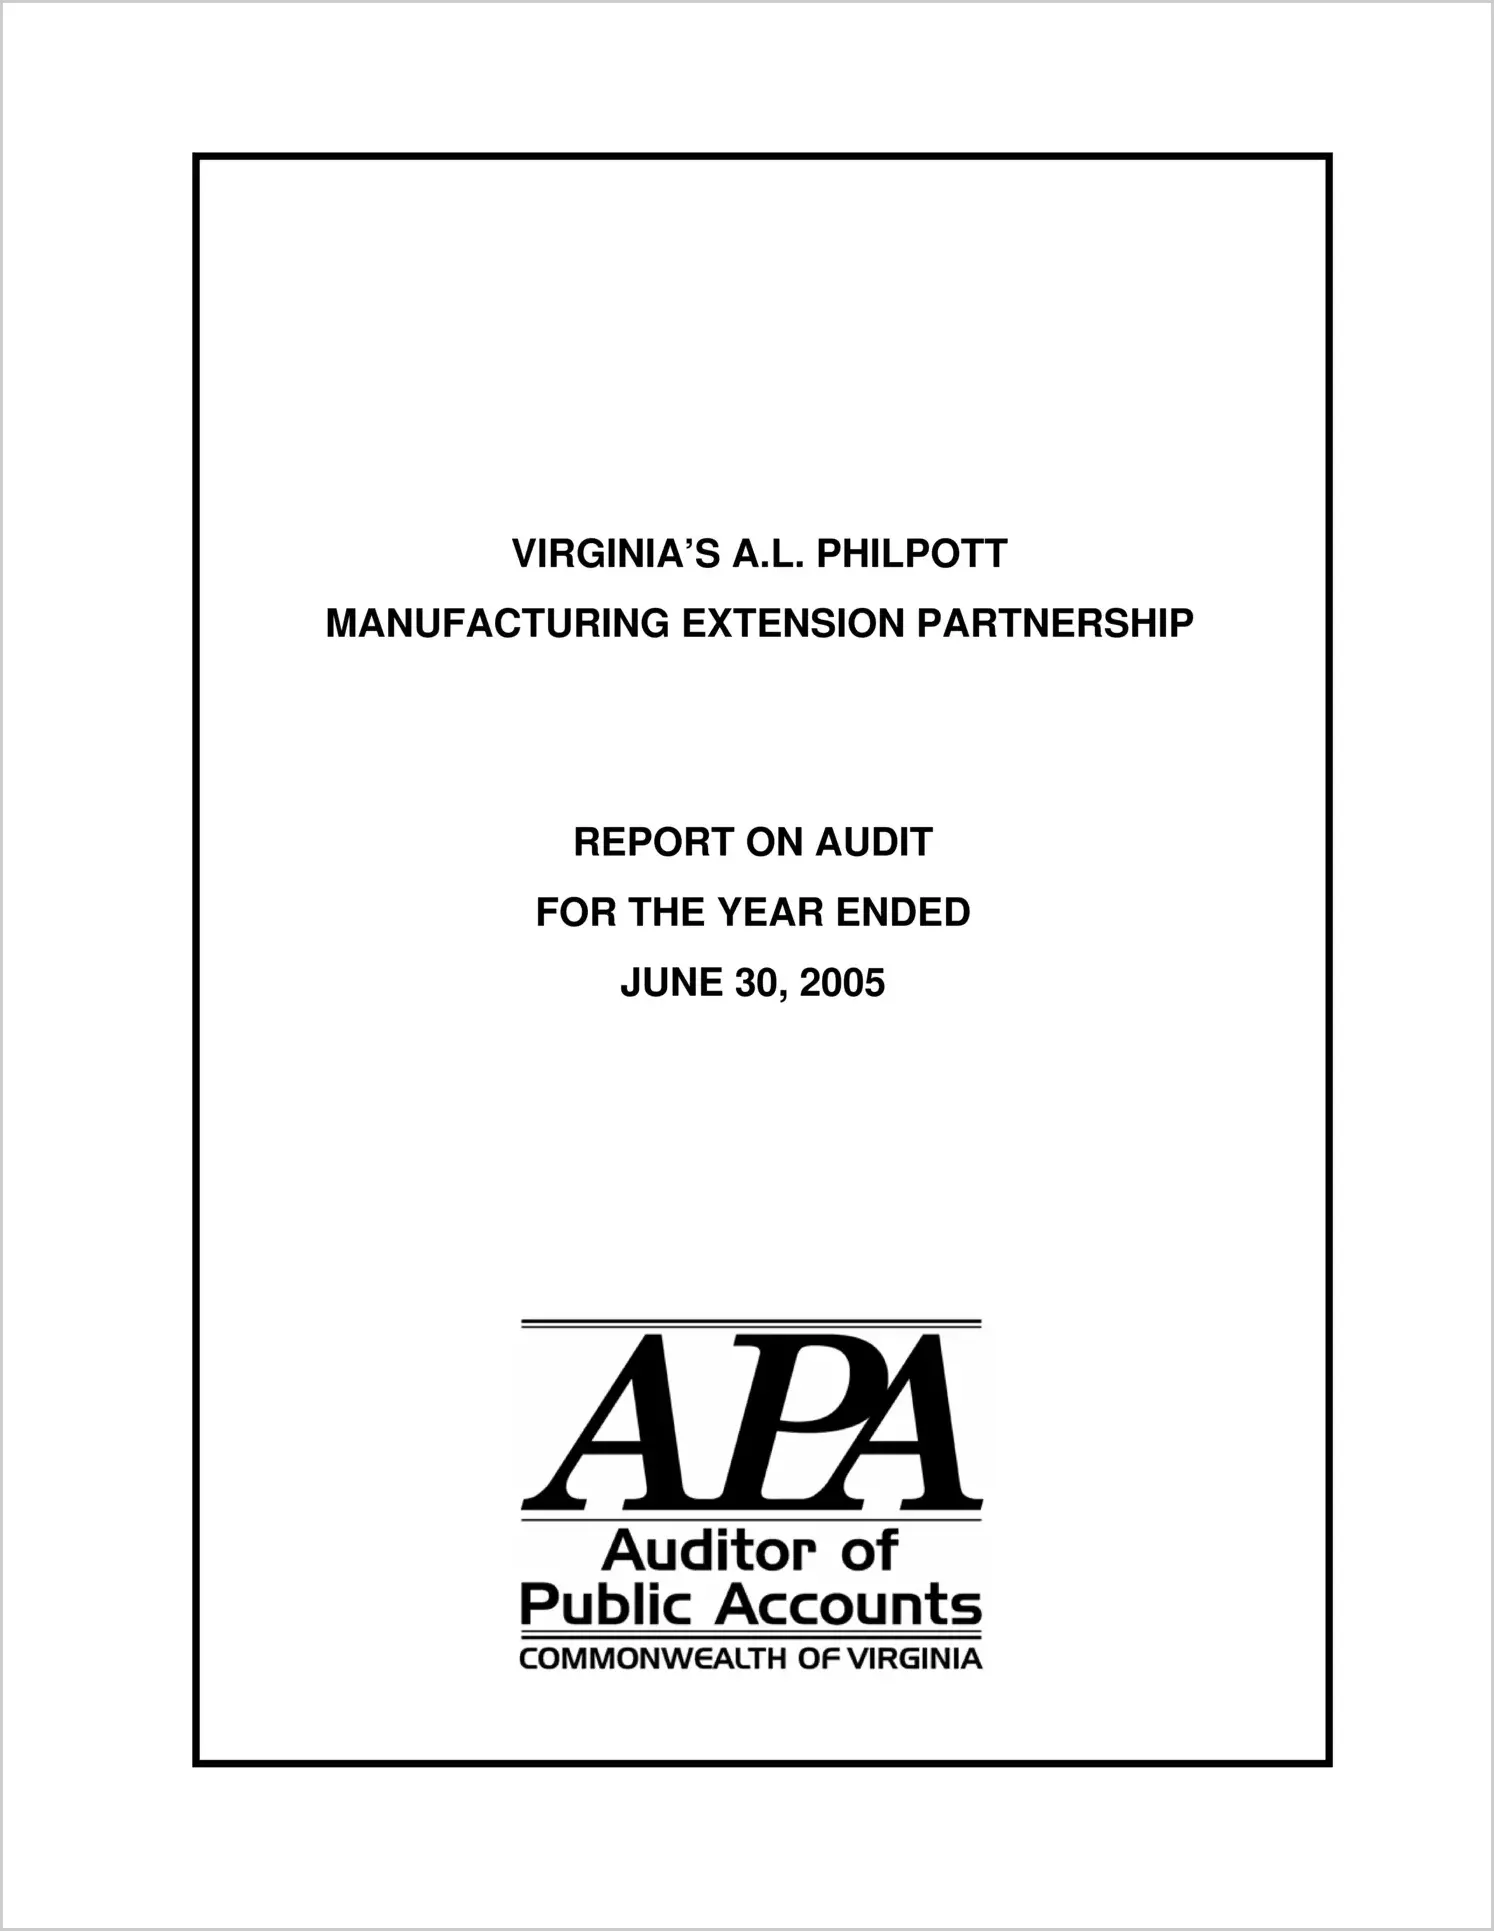 Virginia`s A. L. Philpott Manufacturing Extension Partnership for the year ended June 30, 2005